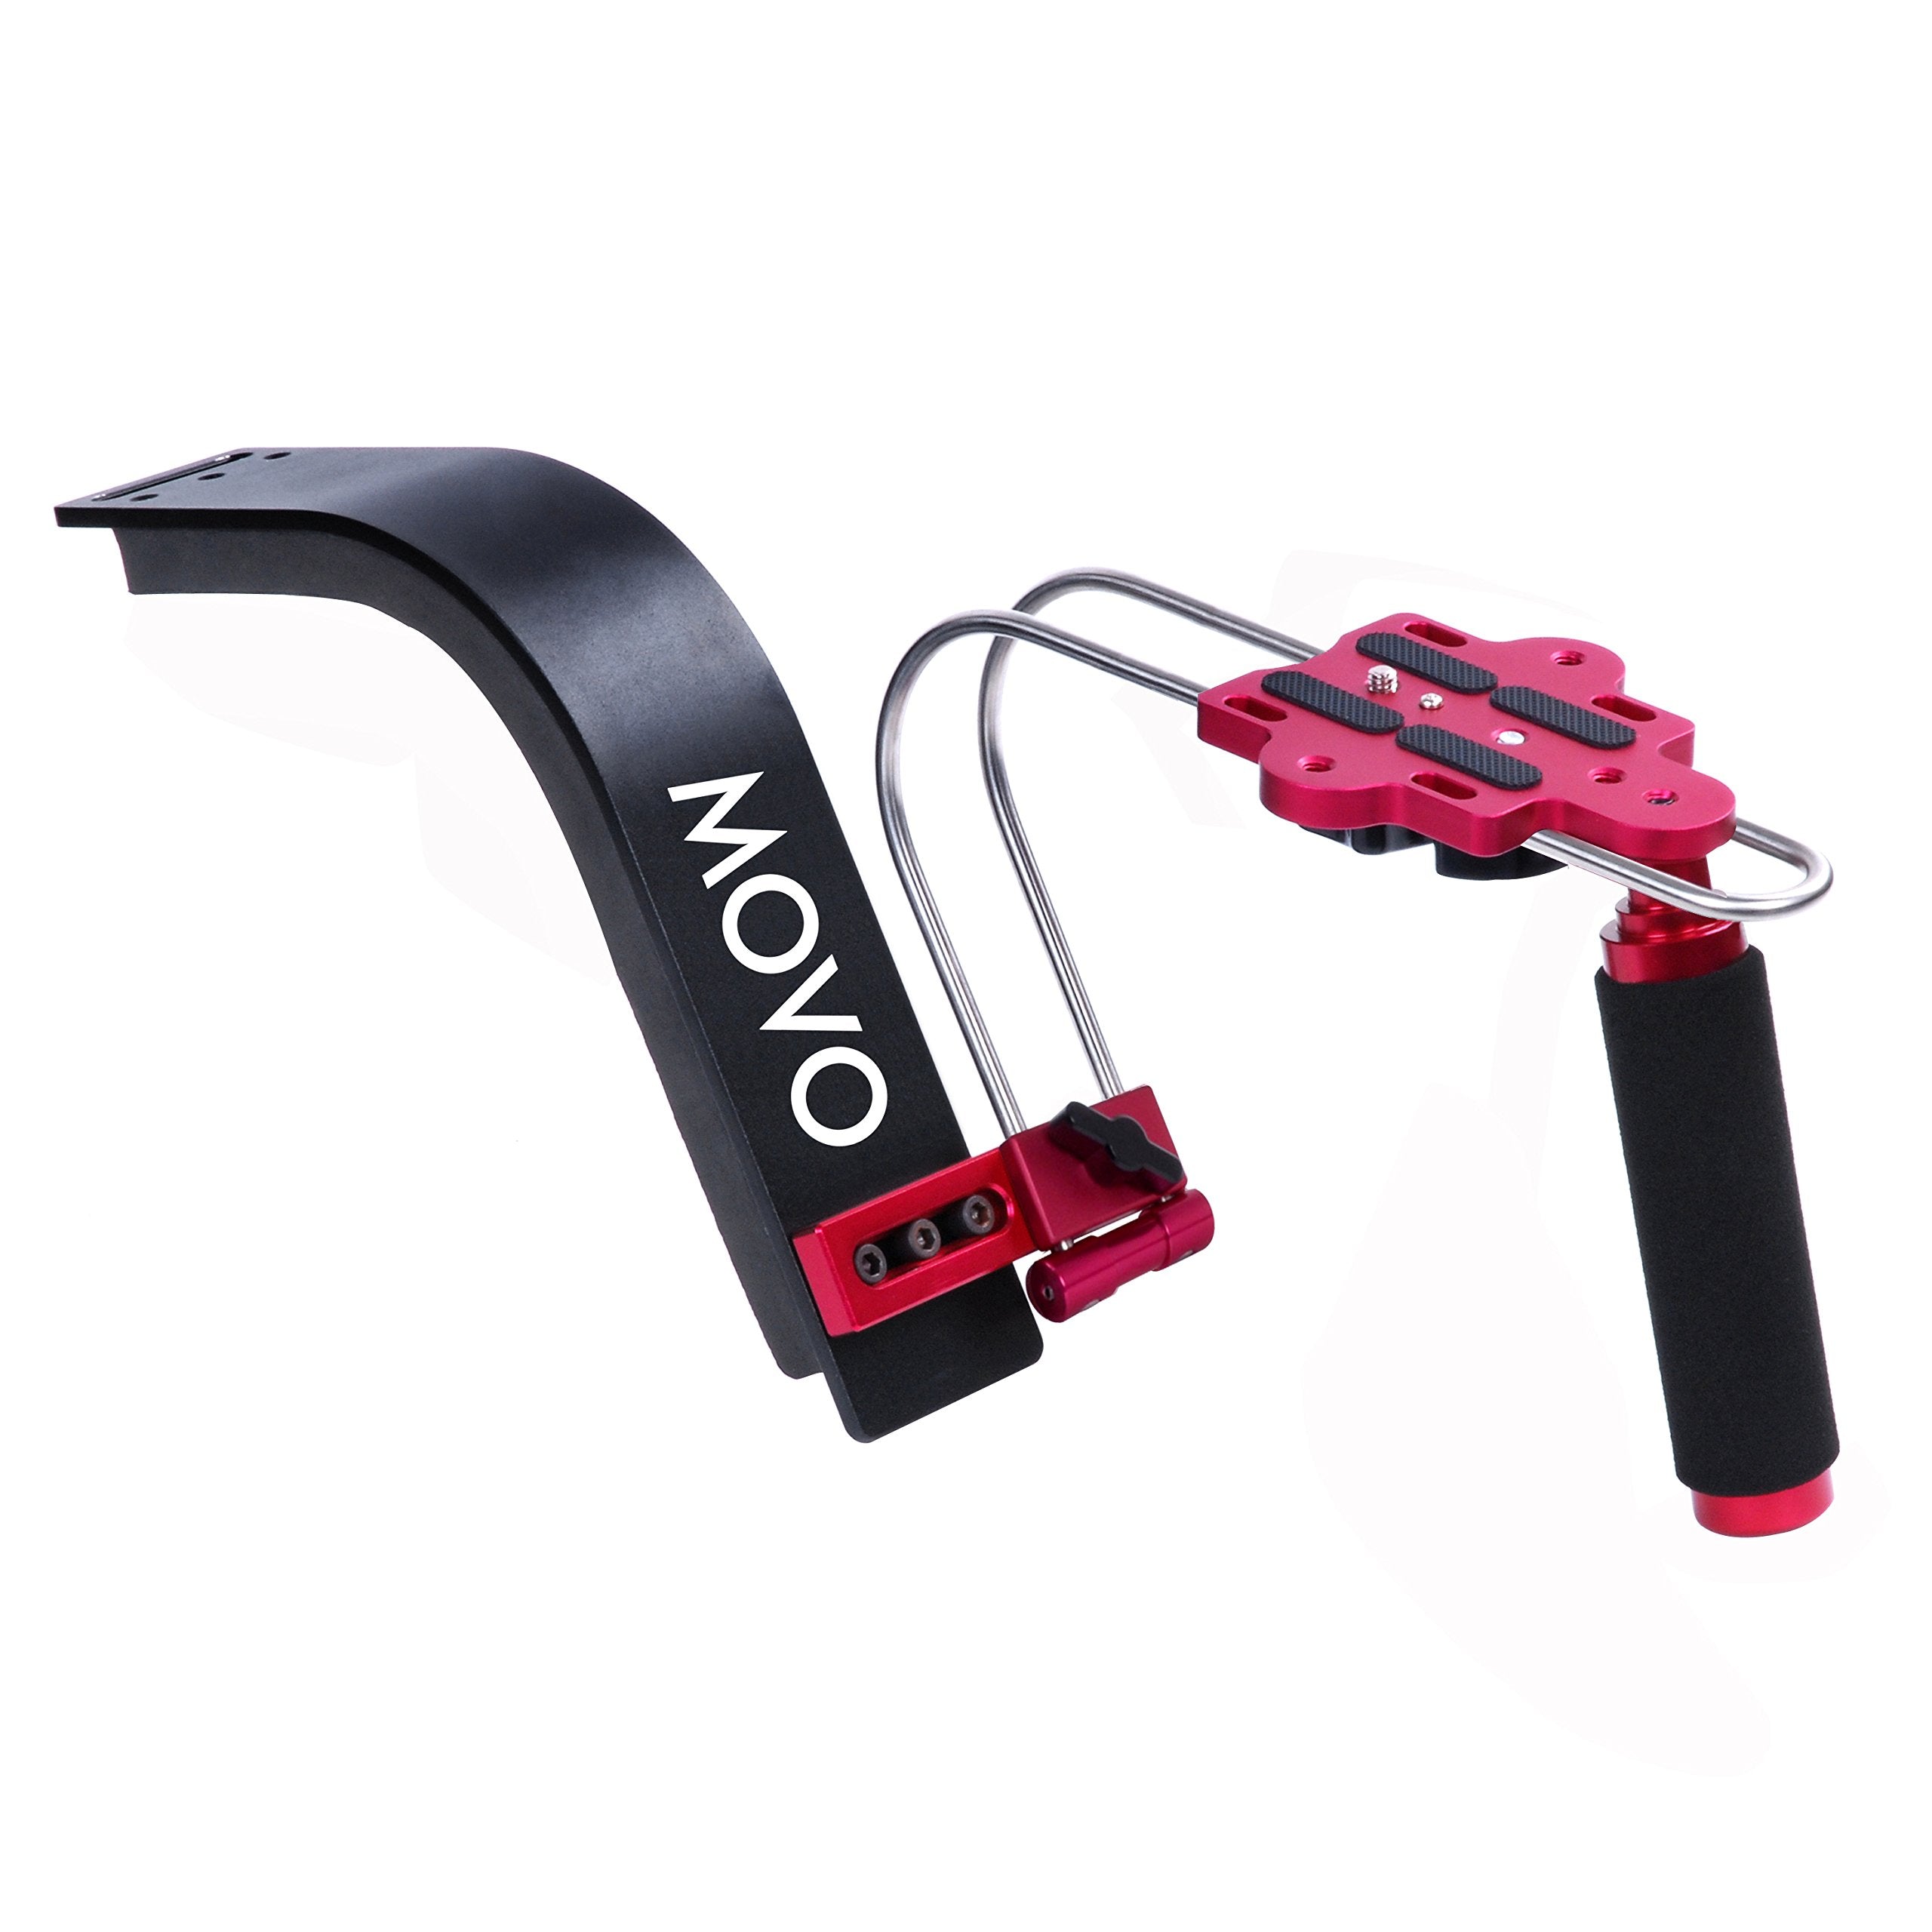 Movo Photo SG300 Deluxe Video Shoulder Support Rig for DSLR Cameras and Camcorders  - Like New